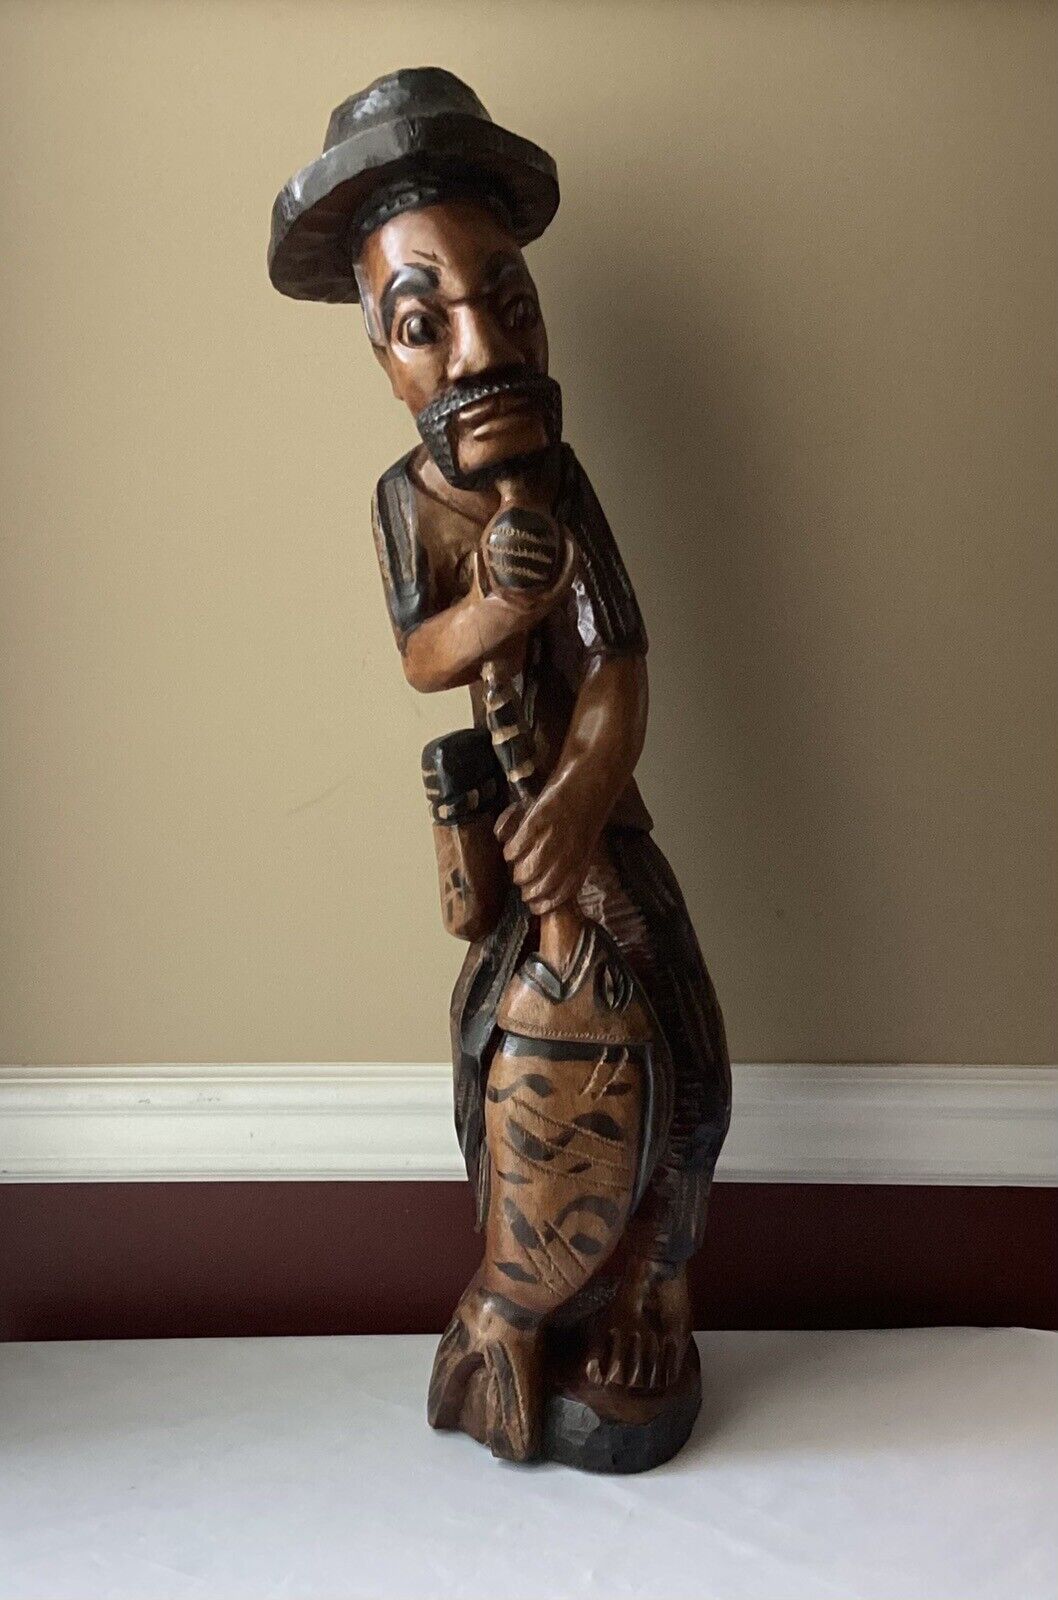 VTG African Folk Art Wooden Carved Statue, Man With Fish, 29